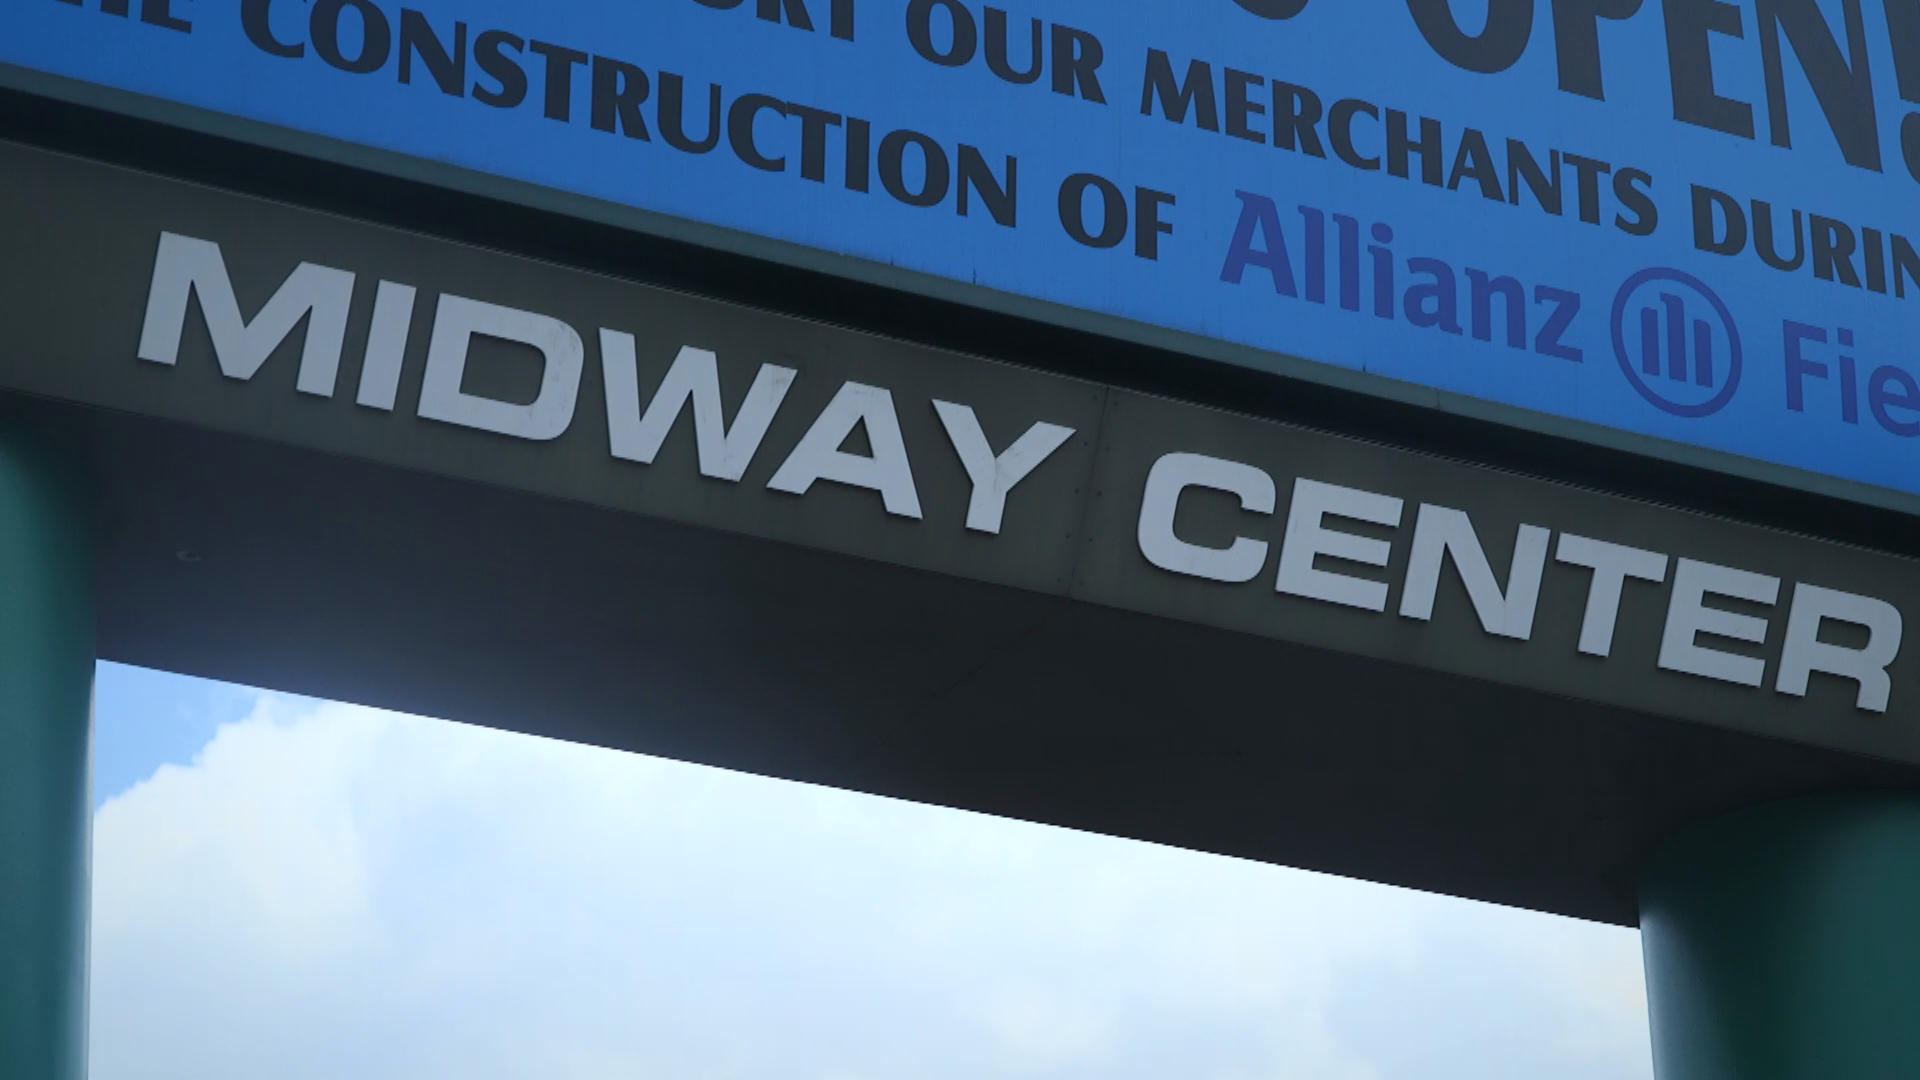 Last month, tenants said the owner of the Midway Shopping Center informed them they would have to exit by mid-July.